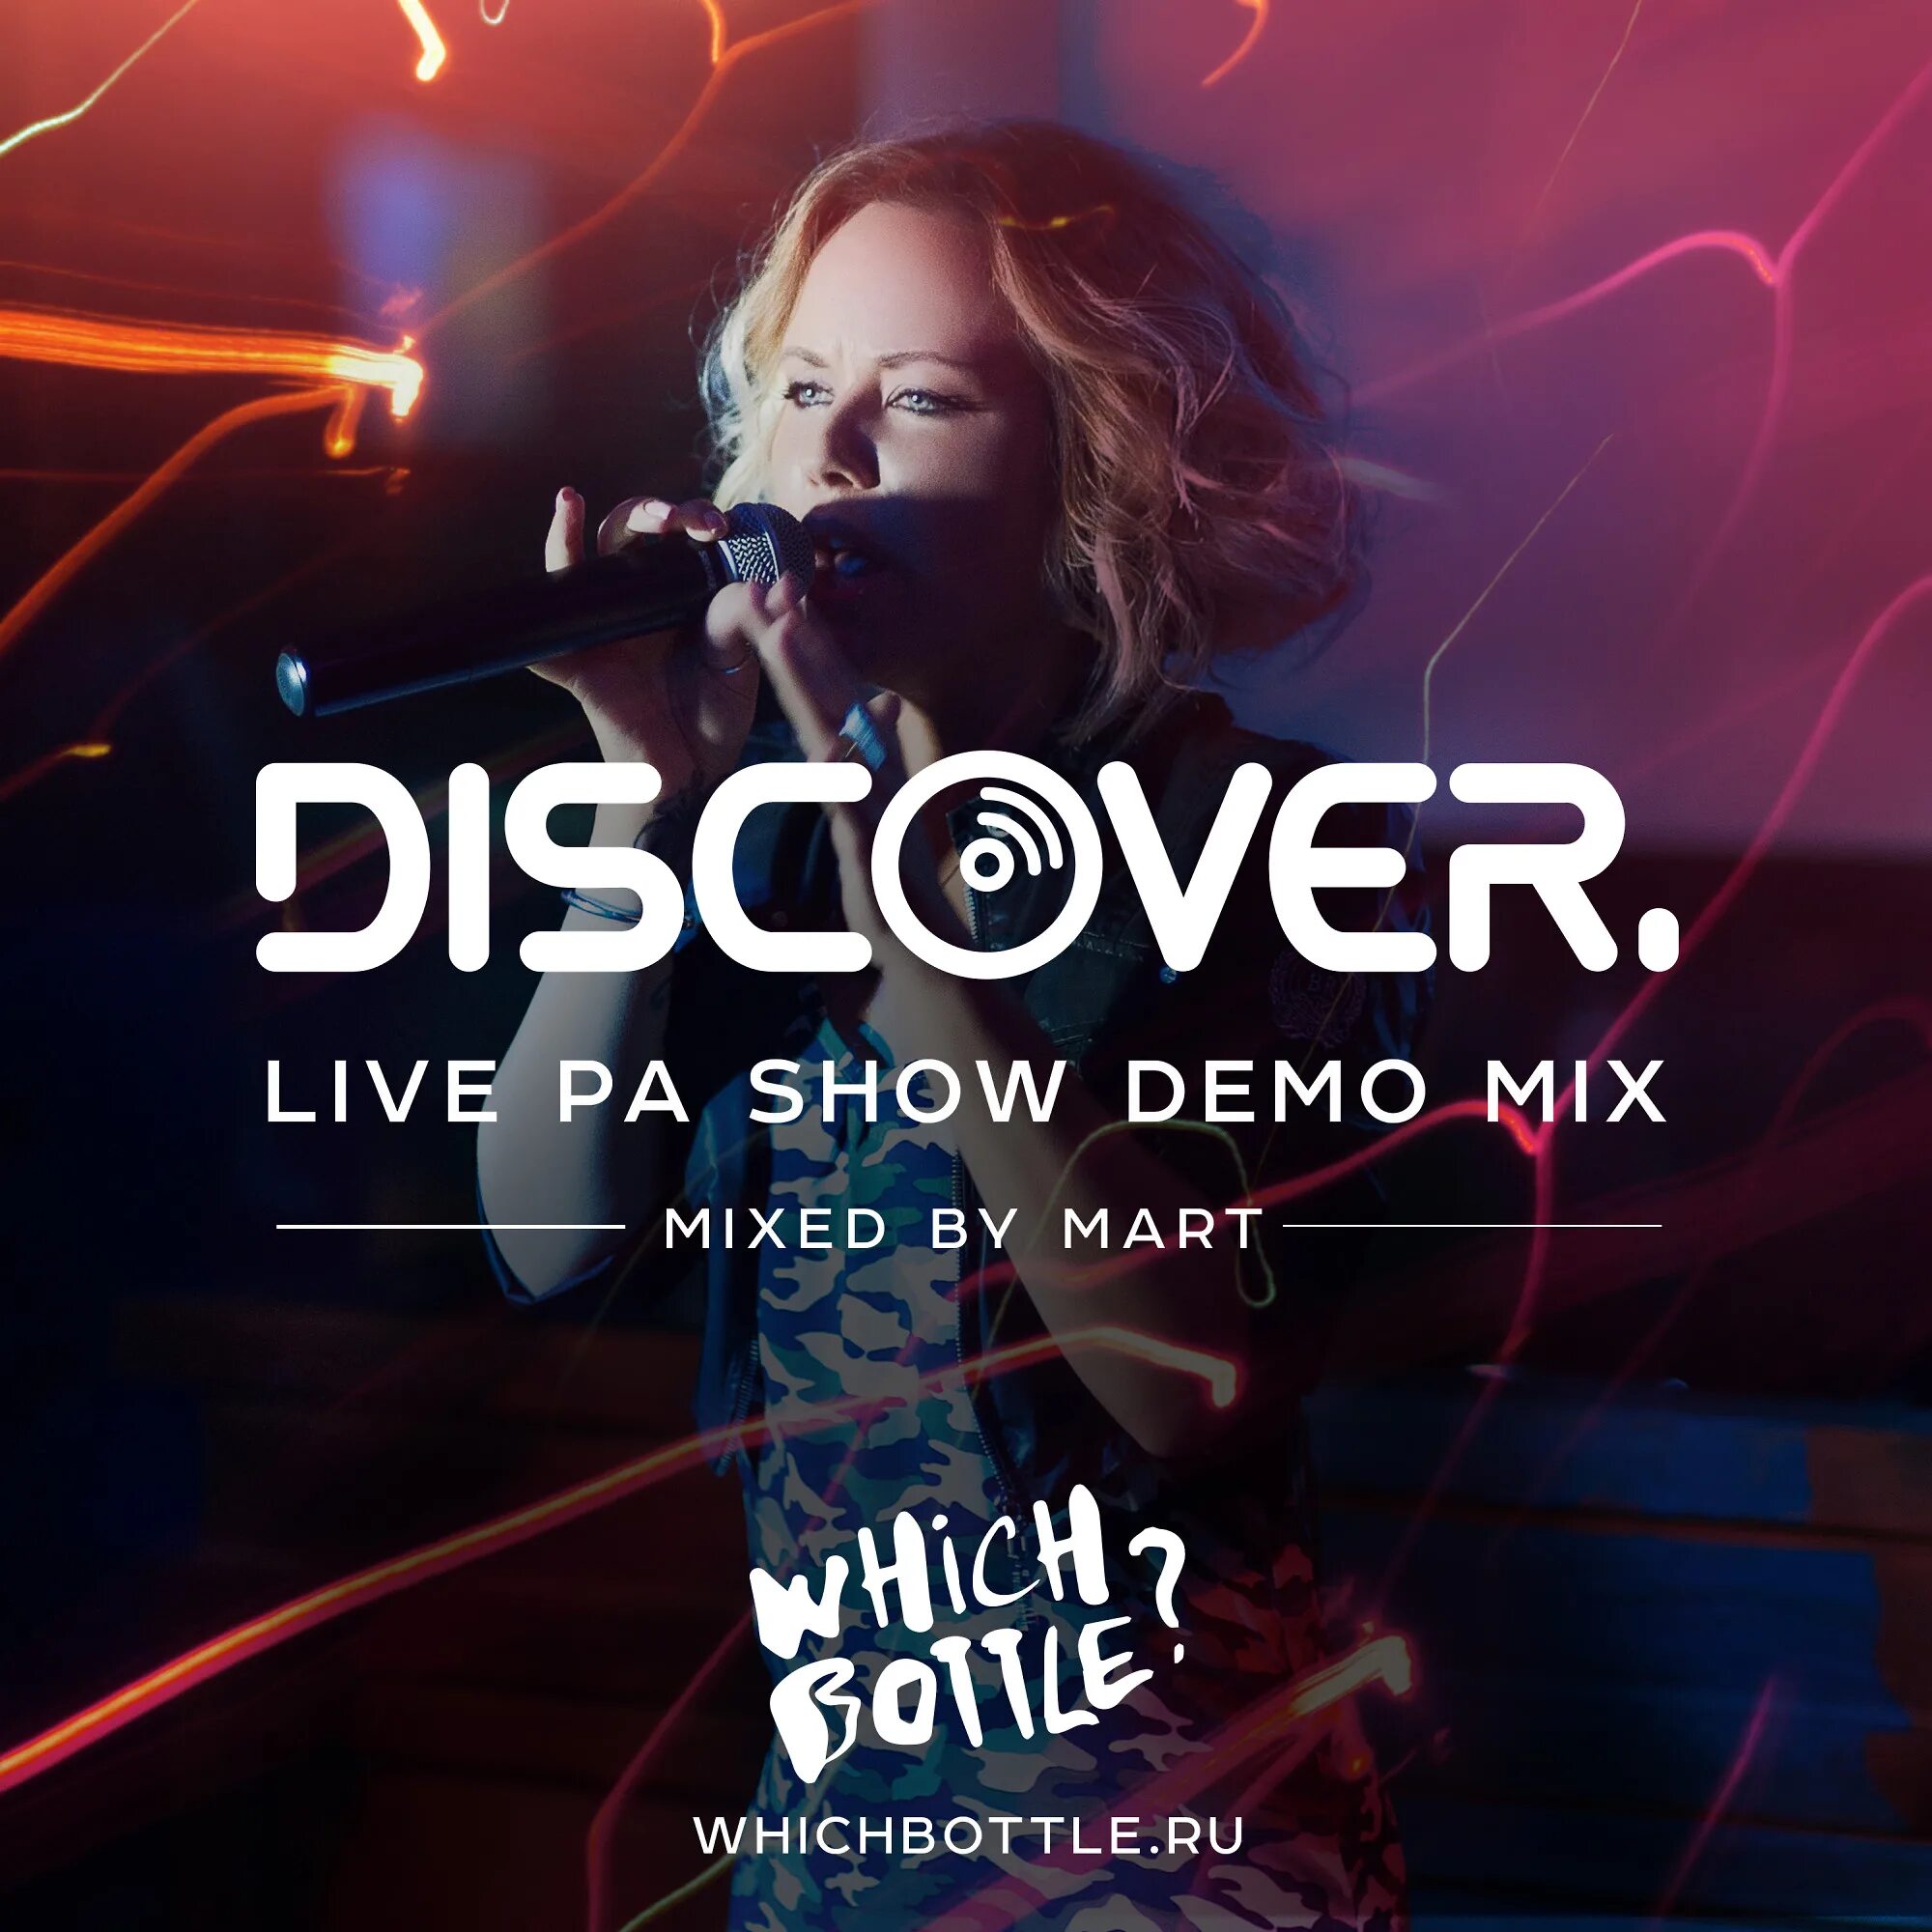 Demo mix. The Rhythm of the Night discover. & Mart -. Микса демо микса демо. Discover город. Disco Discovery.